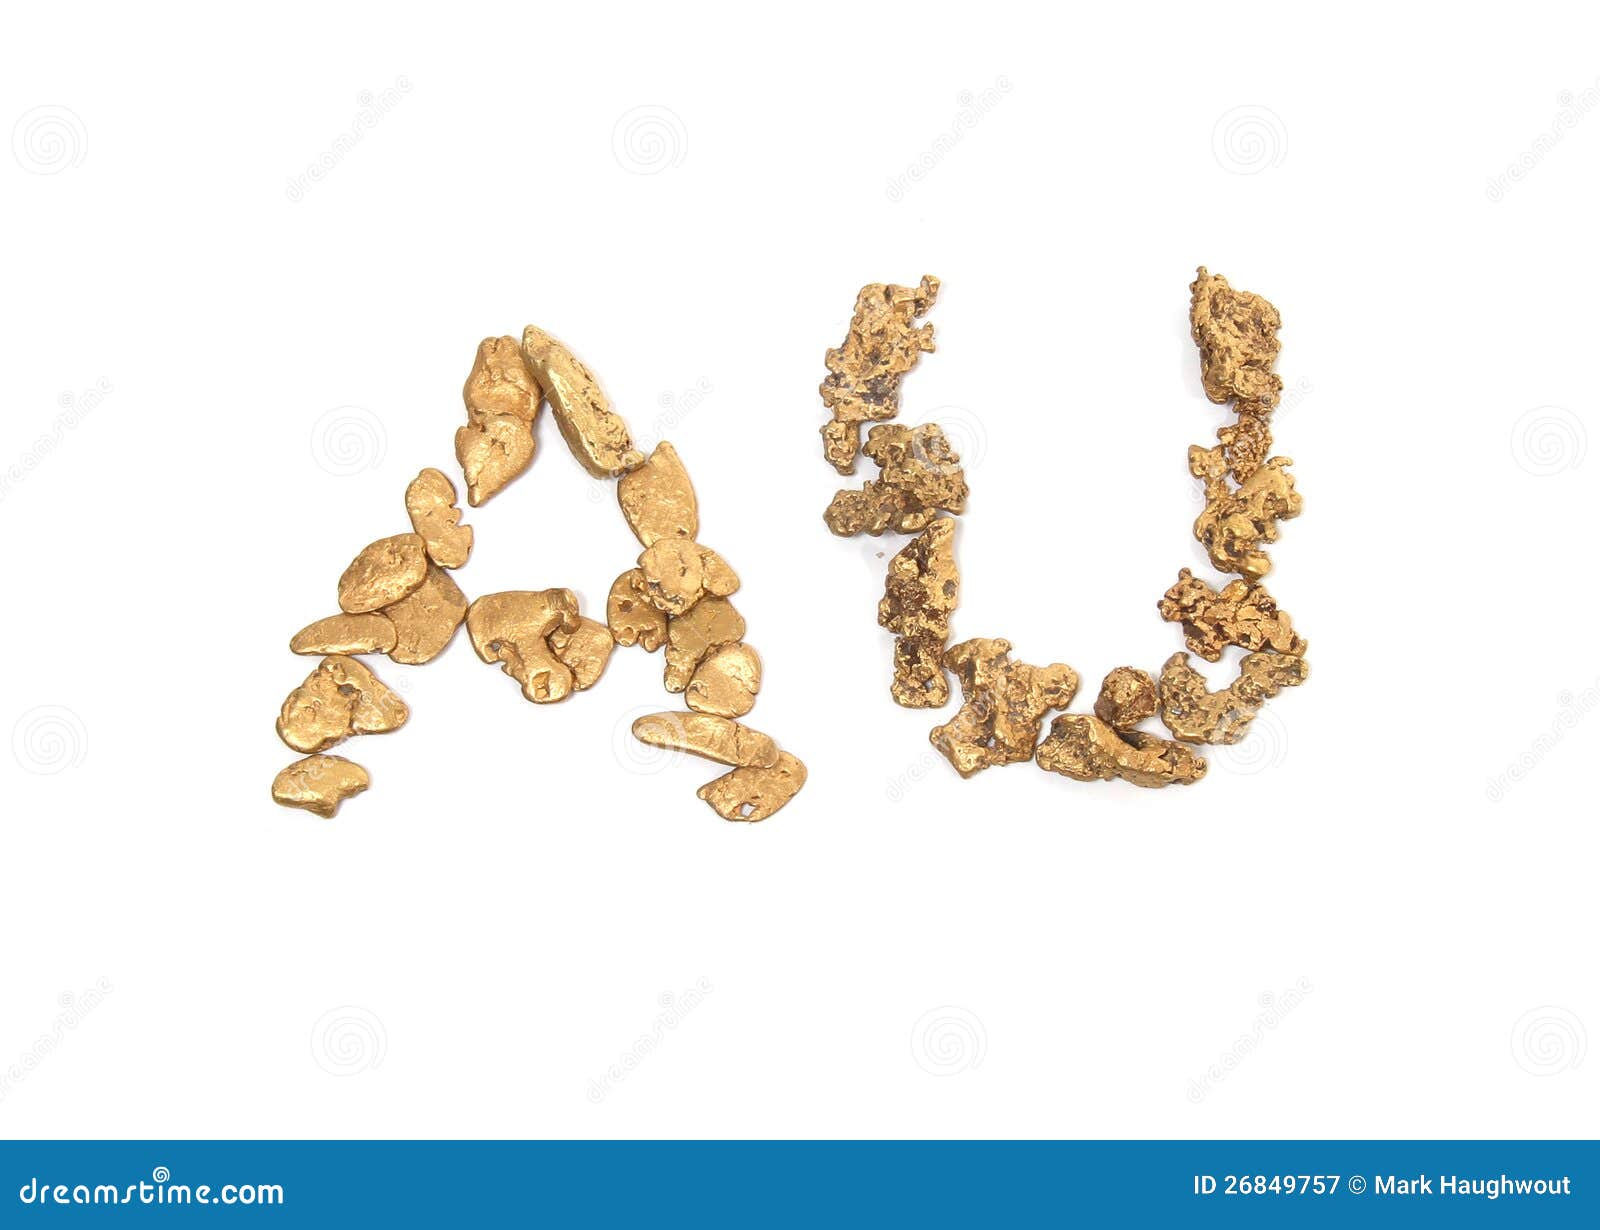 gold nuggets spelling au